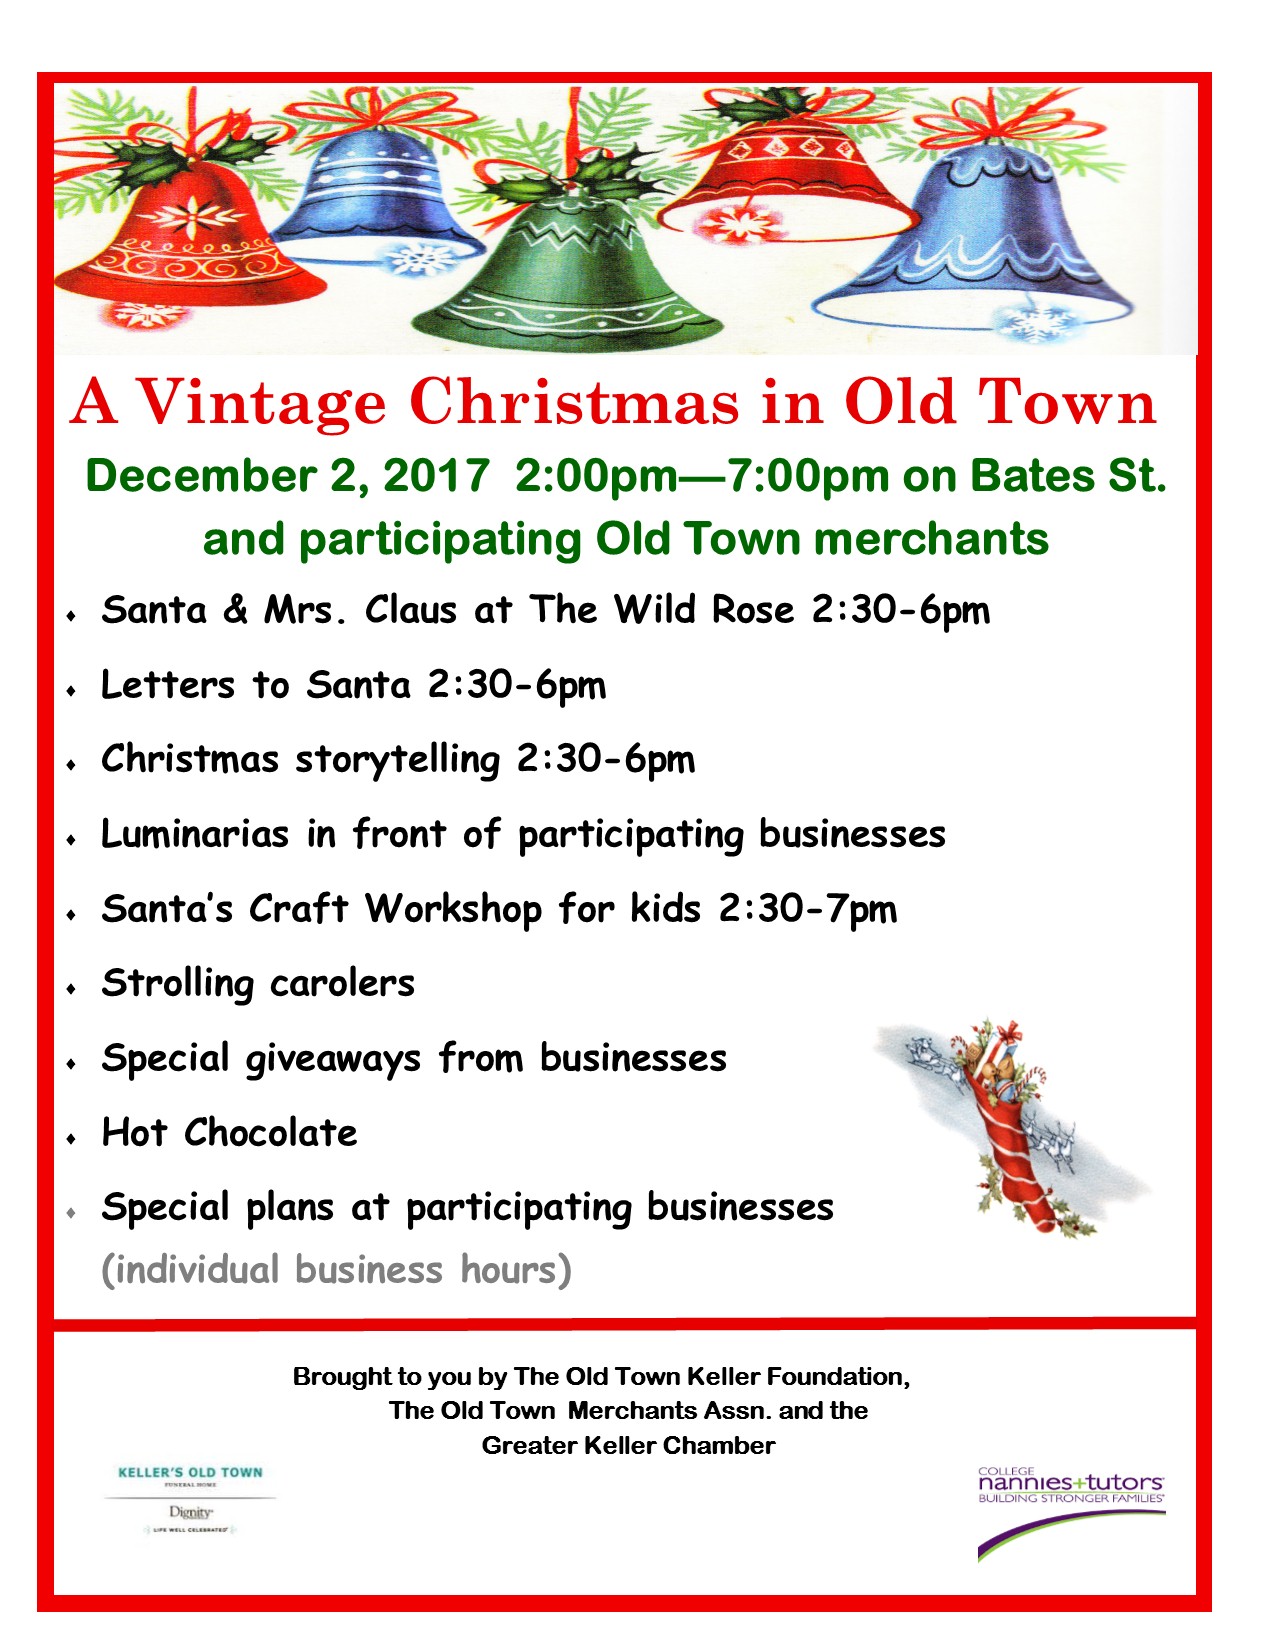 A Vintage Christmas in Old Town